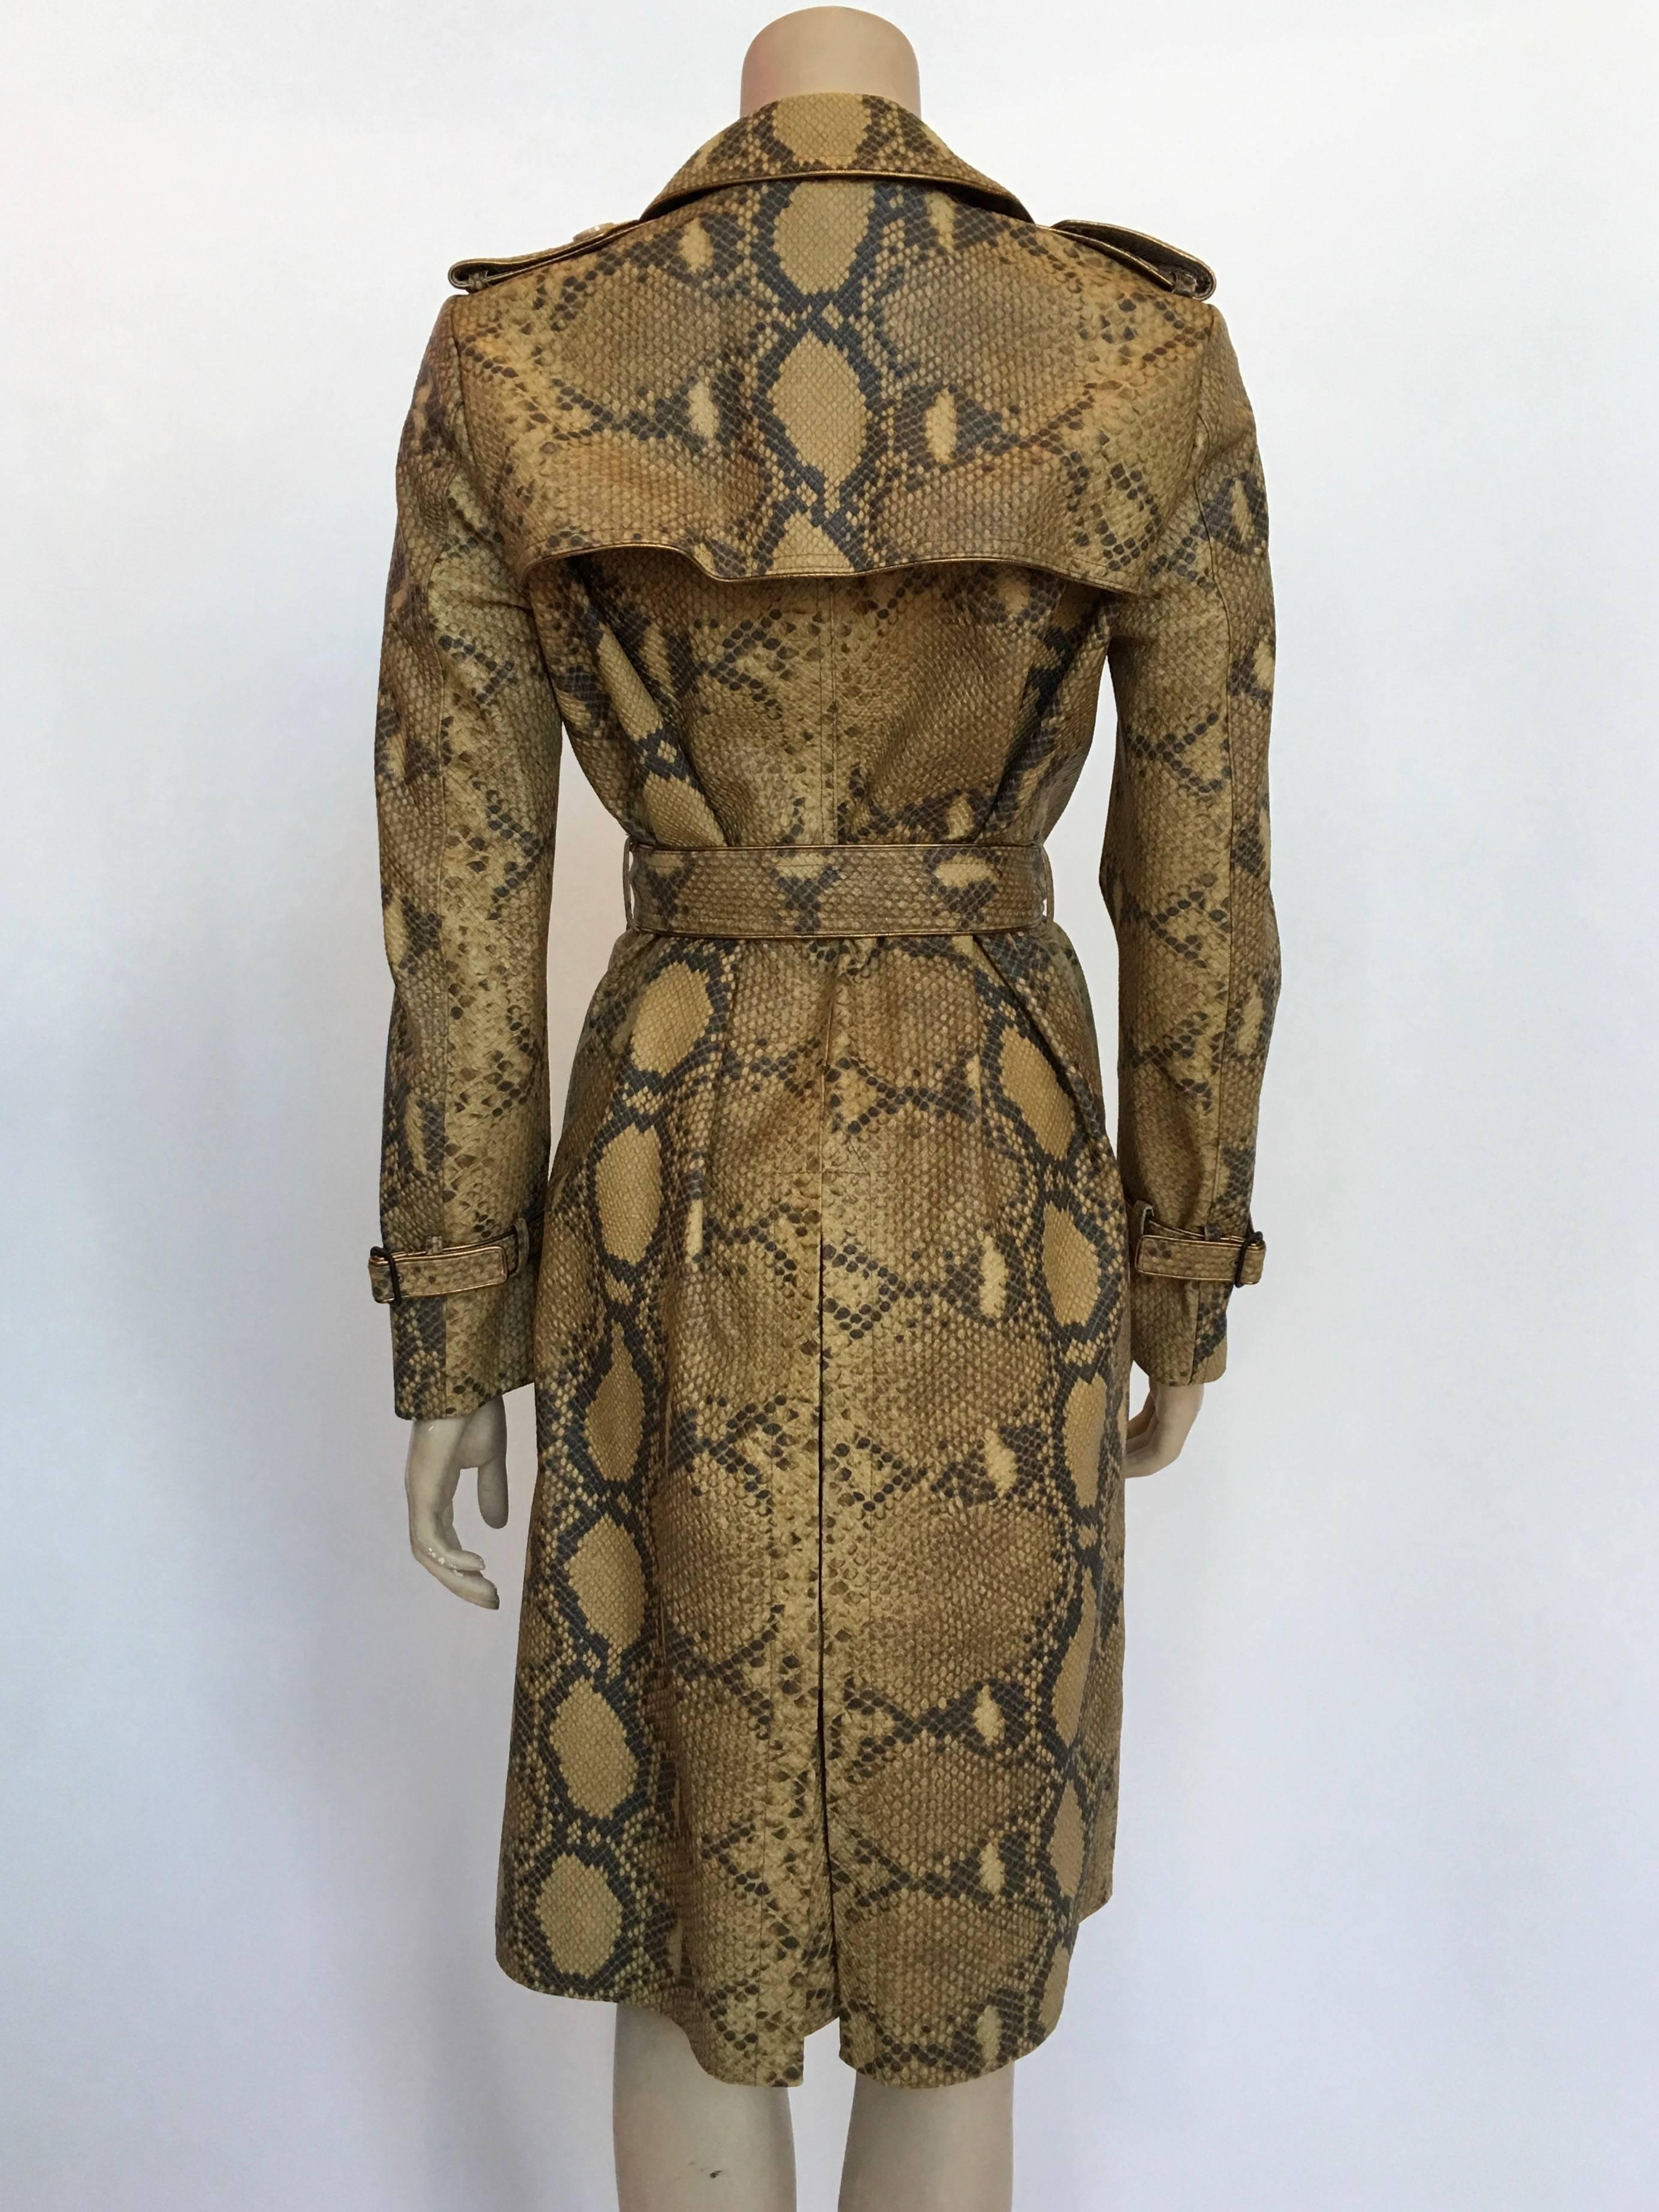 Brown GUCCI Leather Snake Skin Print Trench